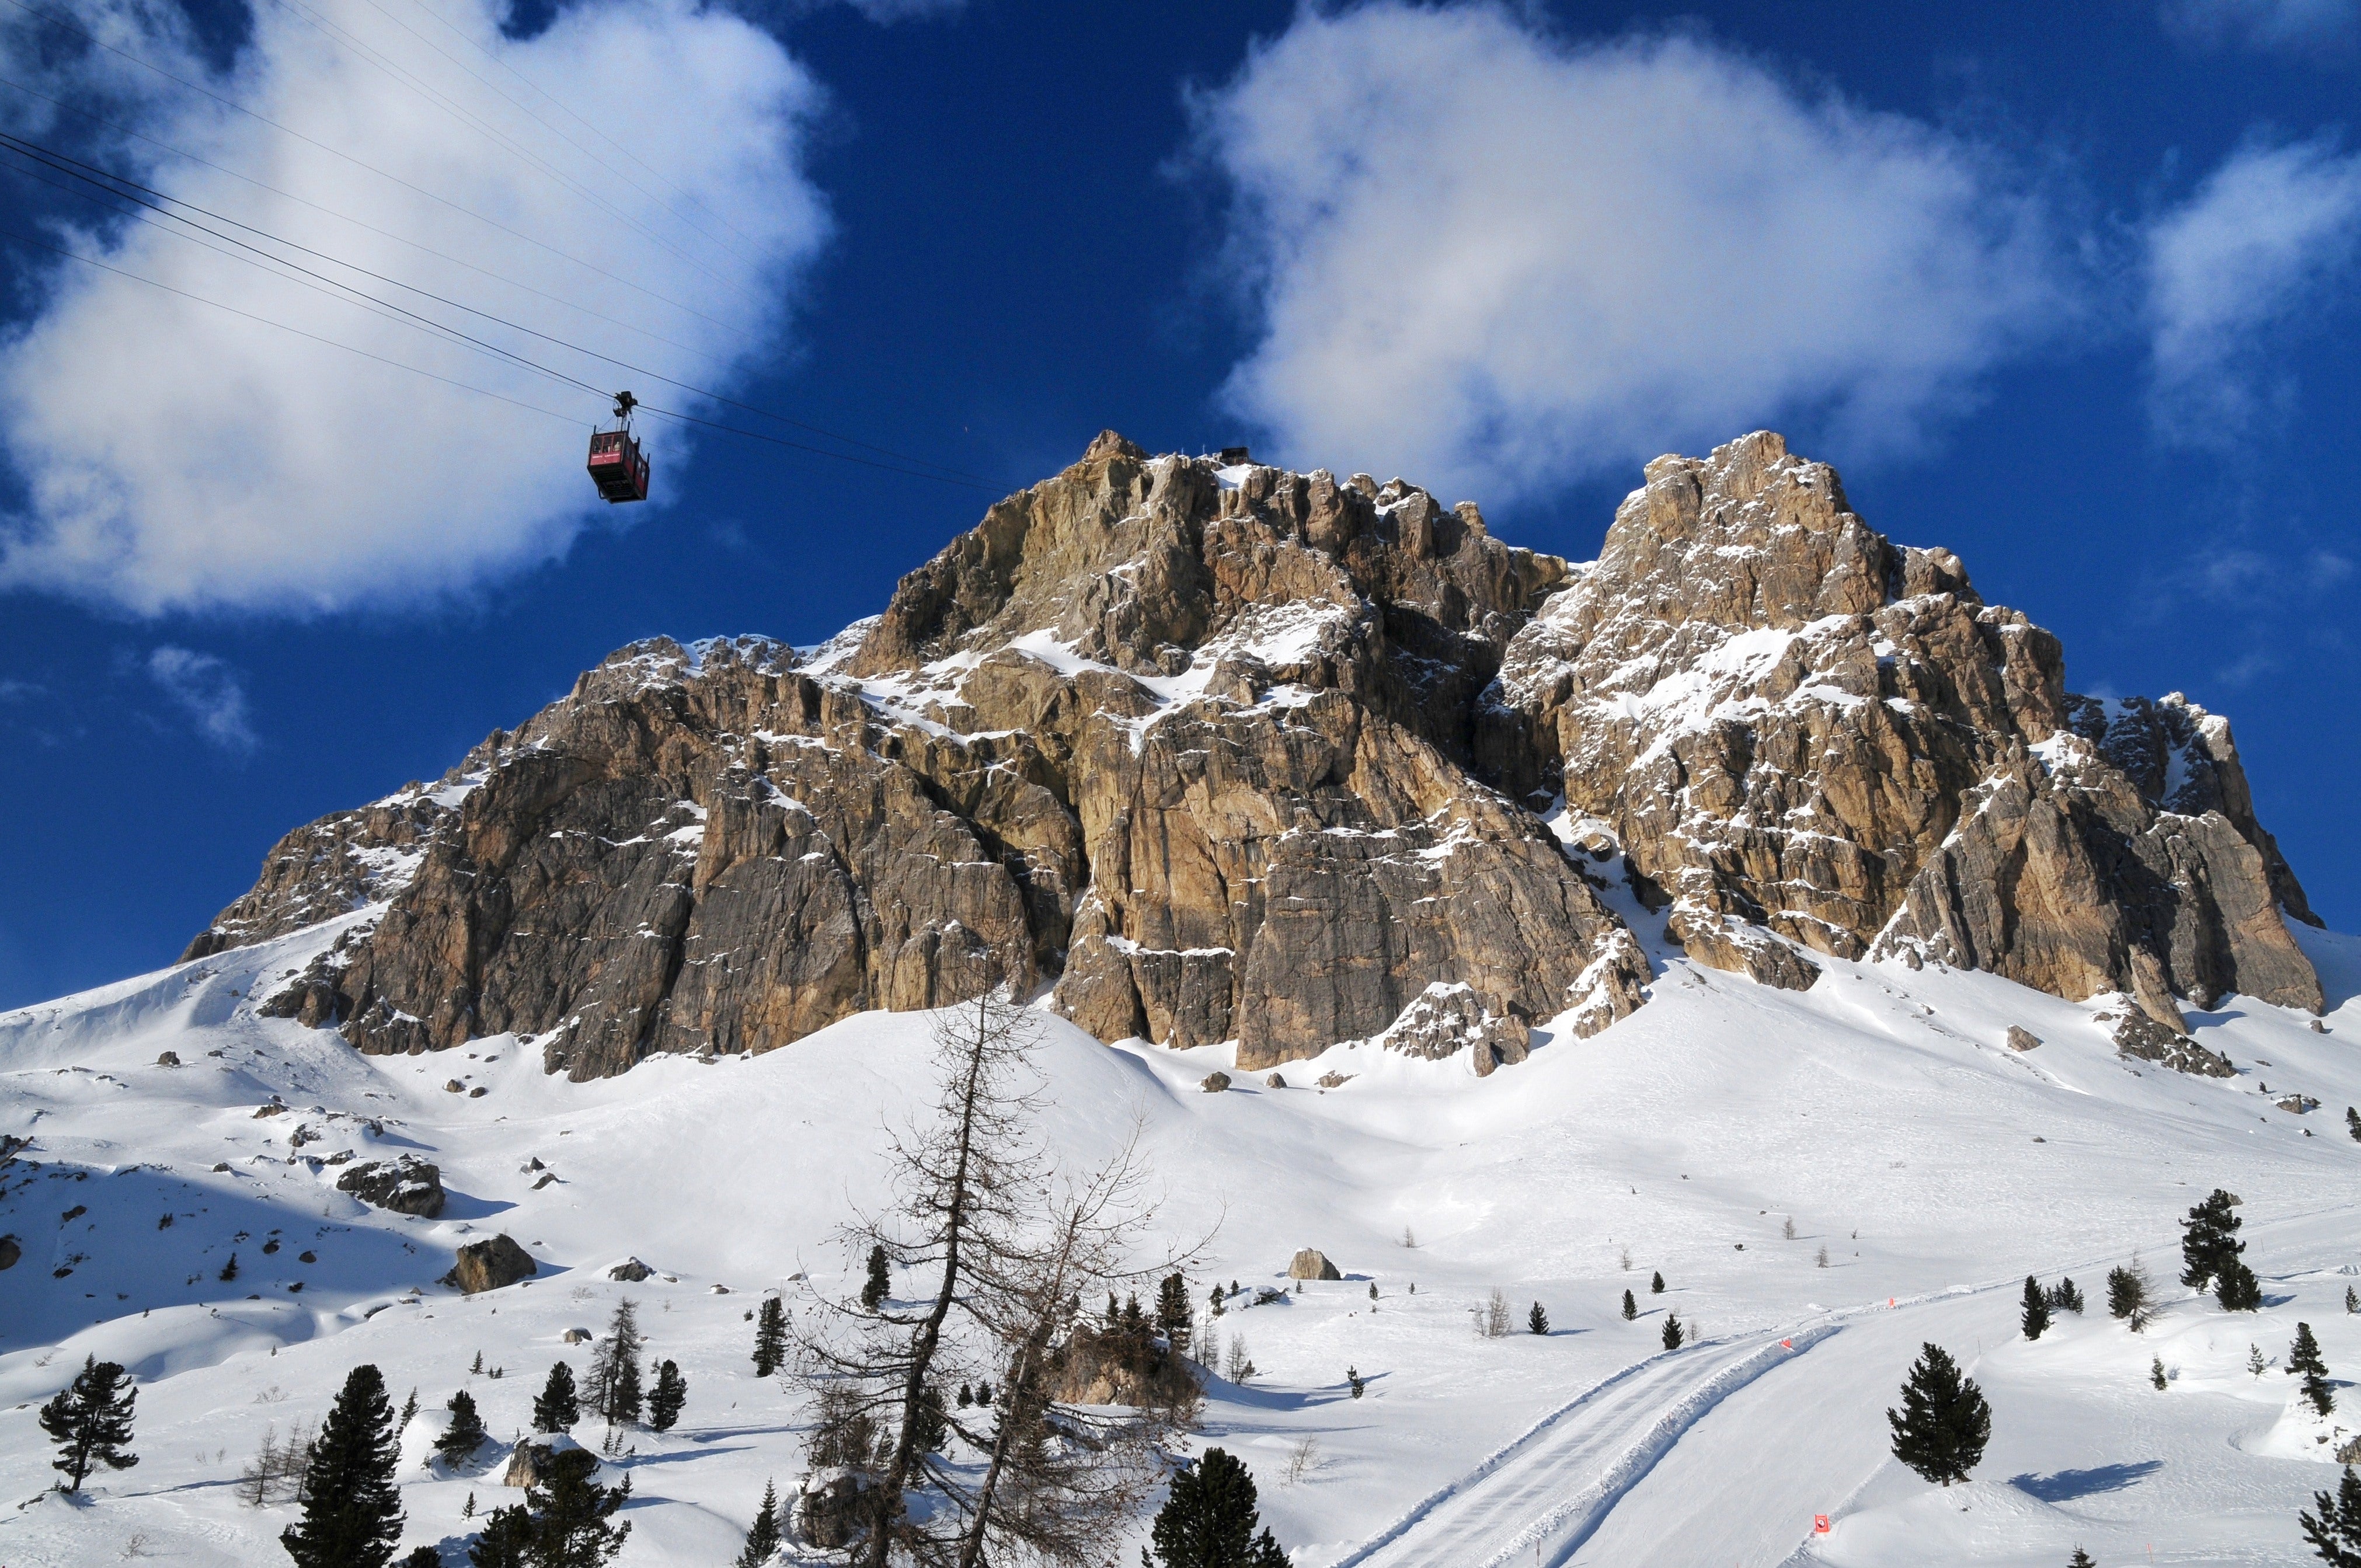 Beginners’ slopes in Abruzzo offer the Italian ski experience away from the crowds of the Alps